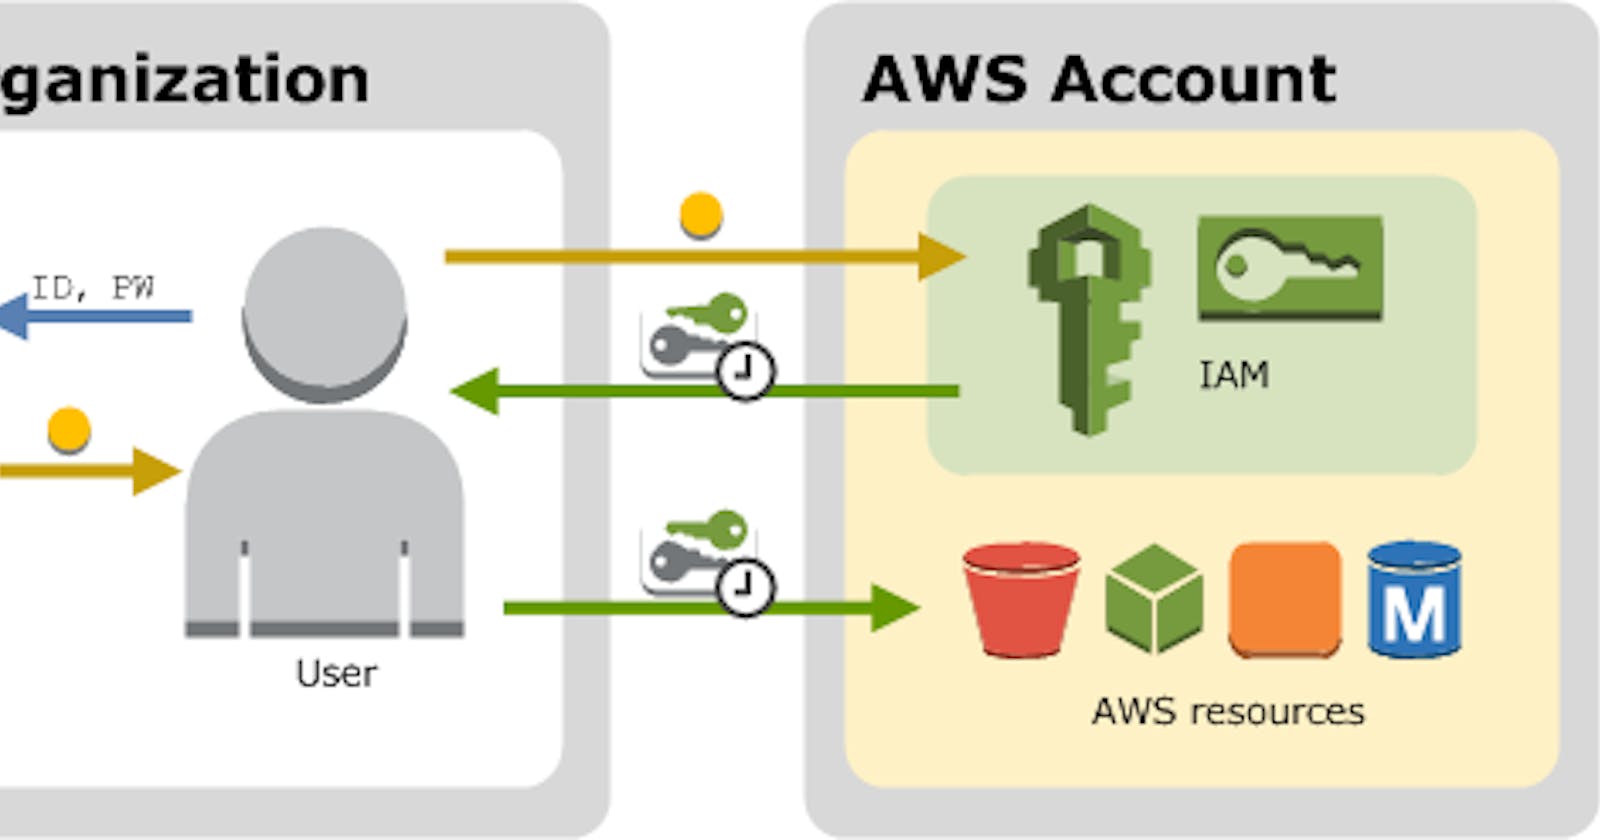 Creating an AWS Account and IAM User and Enabling Access Key for IAM User